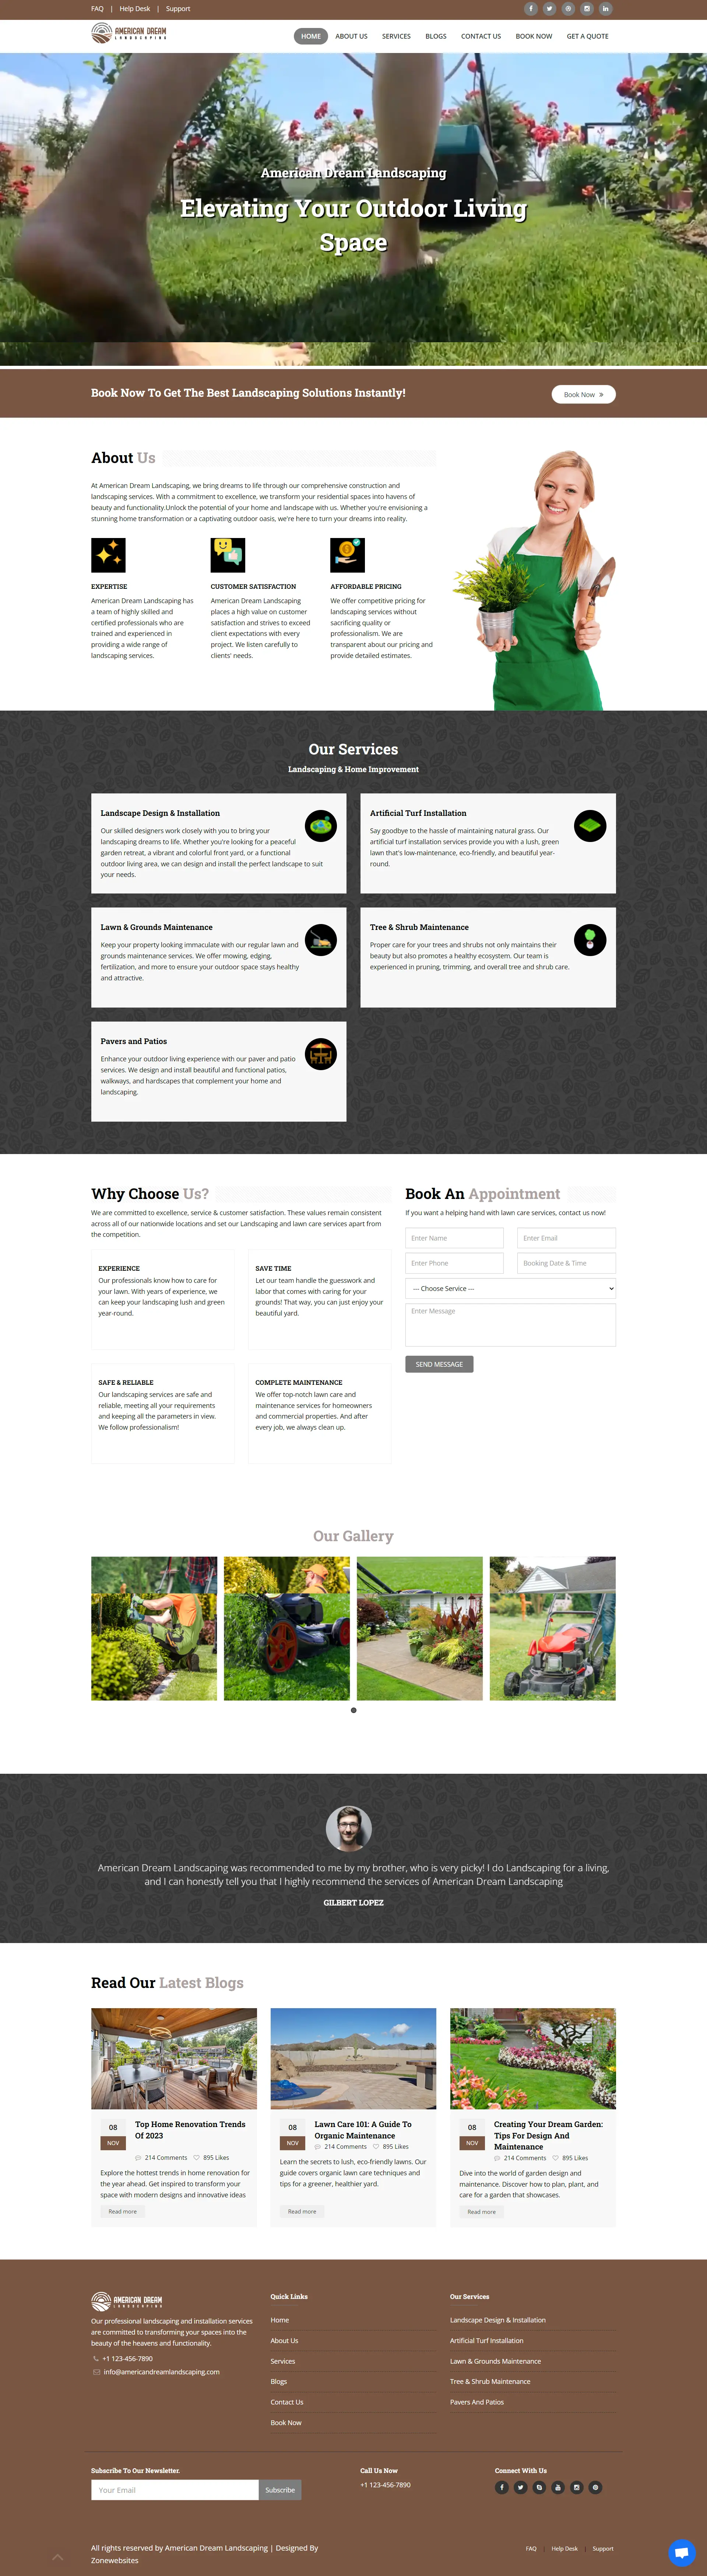 Top-Notch Landscaping and Installation Services Website Theme